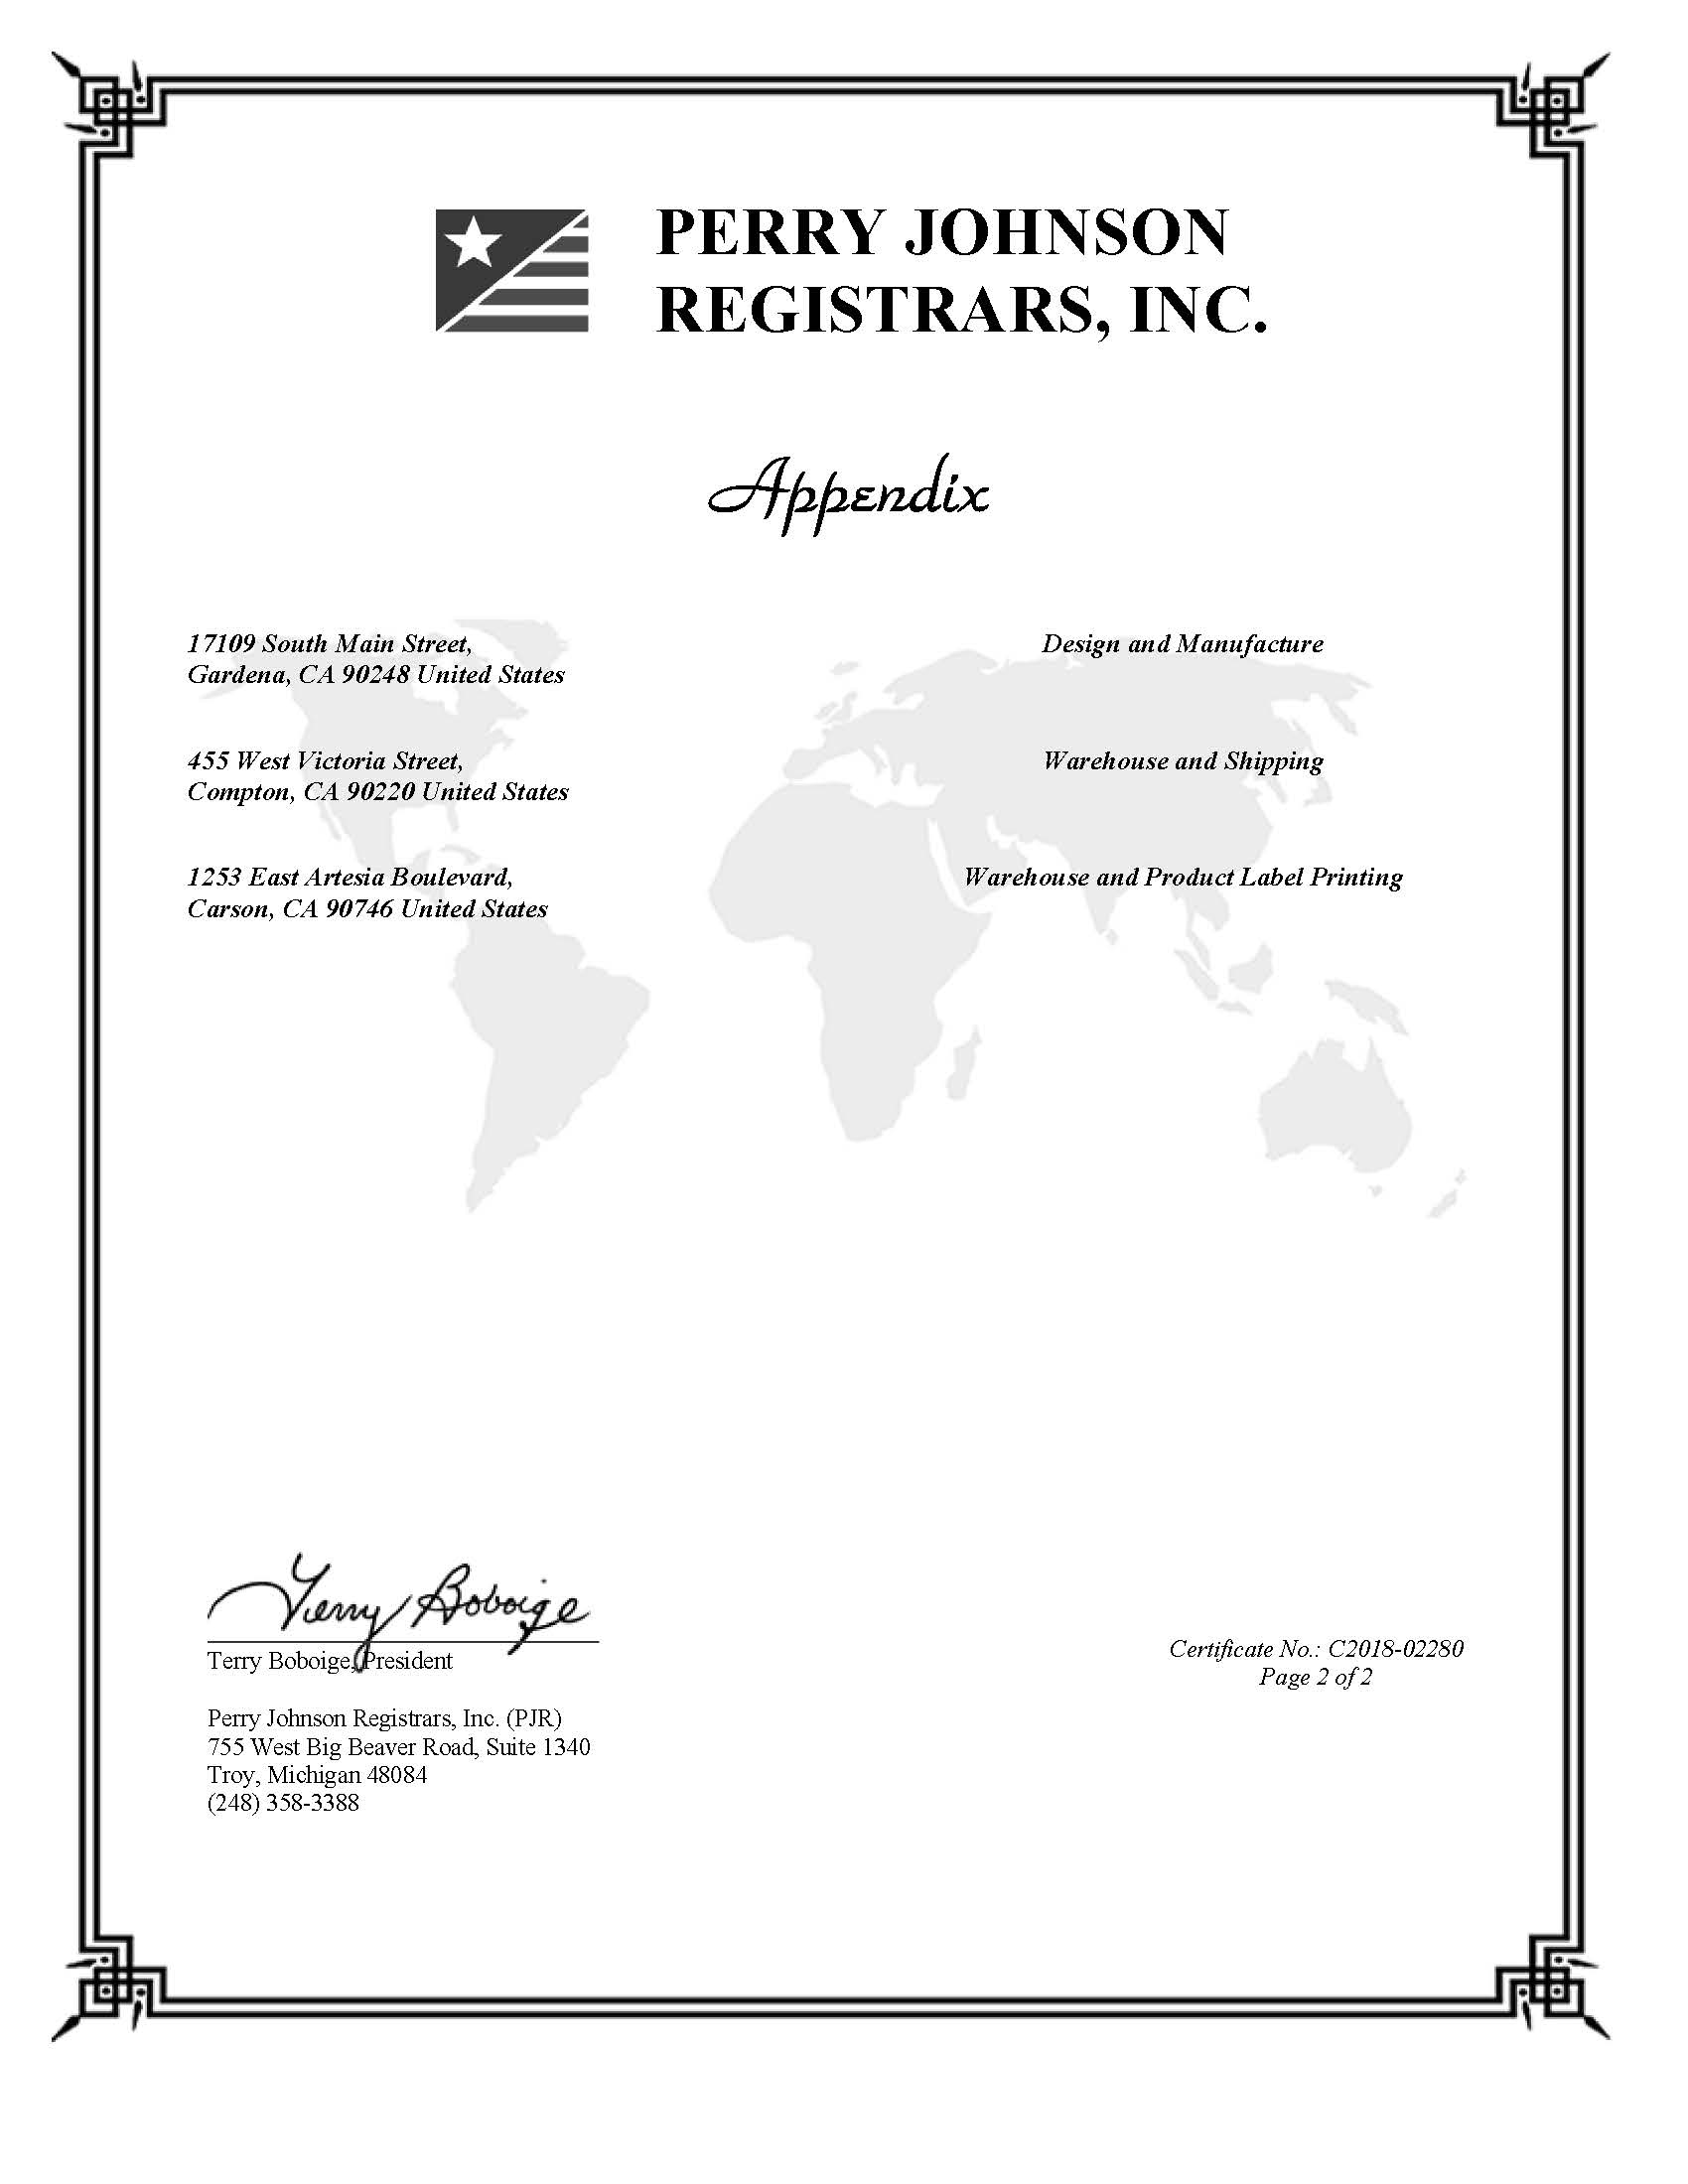 2014 ISO Certificate